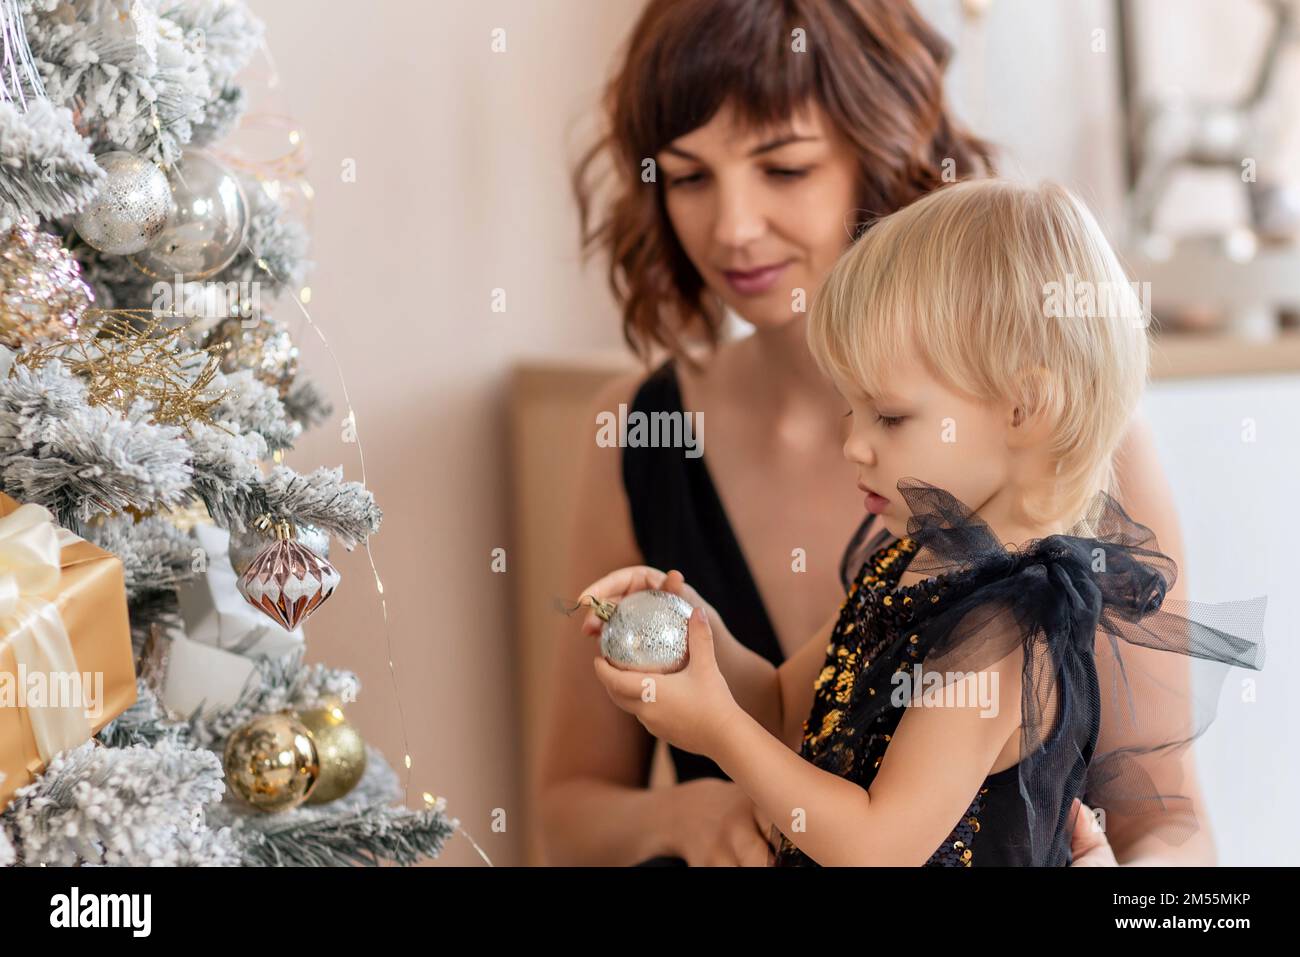 A mother with a 2 years old daughter decorates the Christmas tree. Both are dressed in black dresses, the daughter hangs a ball on the Christmas tree. Stock Photo